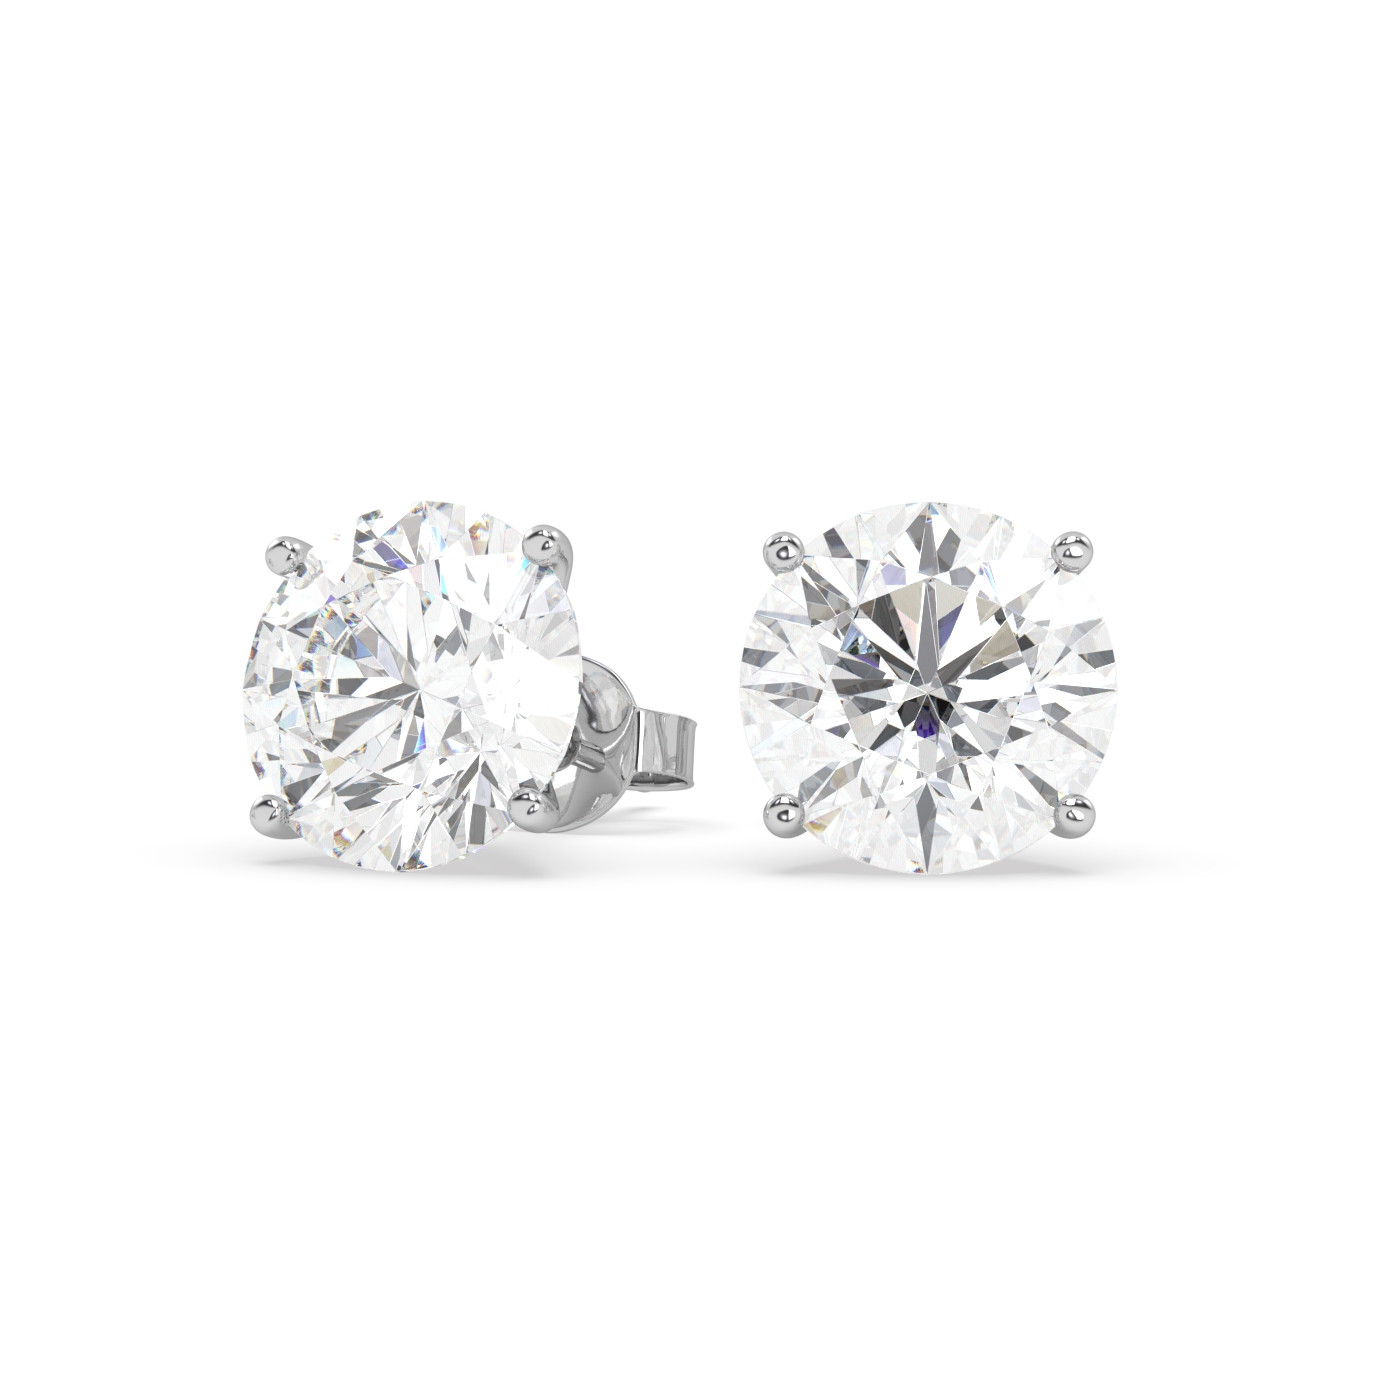 18K WHITE GOLD Round Stud Earrings with butterfly back